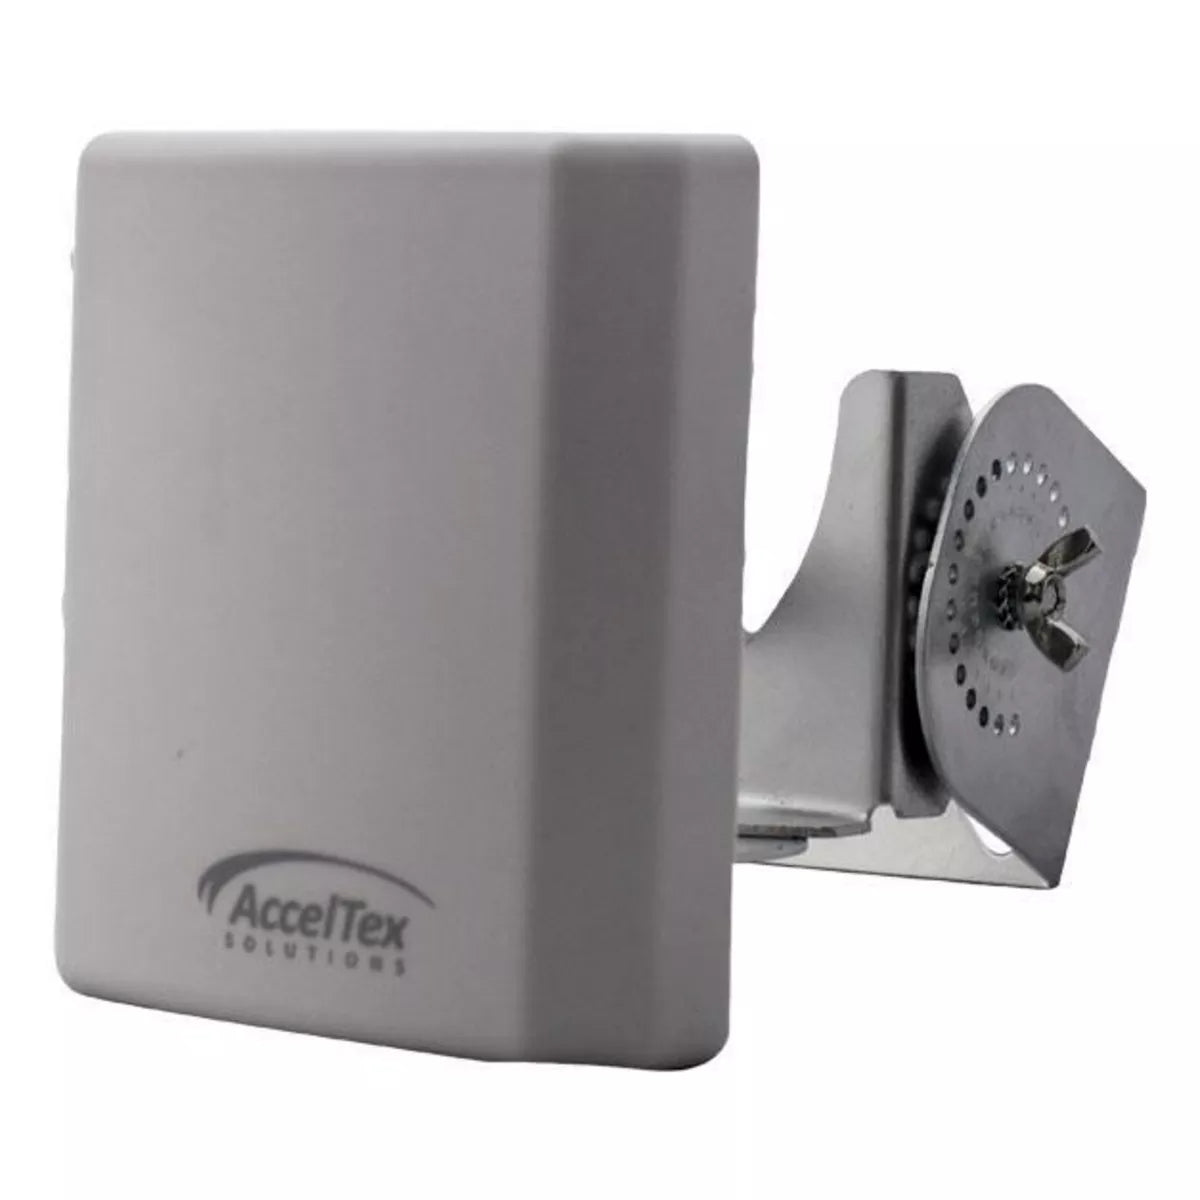 ATS-OP-245-810-6NP-36-V2-1_1200 Acceltex 2.4/5 GHz 8/10 dBi 6 Element Indoor/Outdoor Patch Antenna with N-Style V2 Wi-Fi Antennas acceltex acceltex antennas acceltex patch antenna acceltex solutions patch antenne wifi antennen